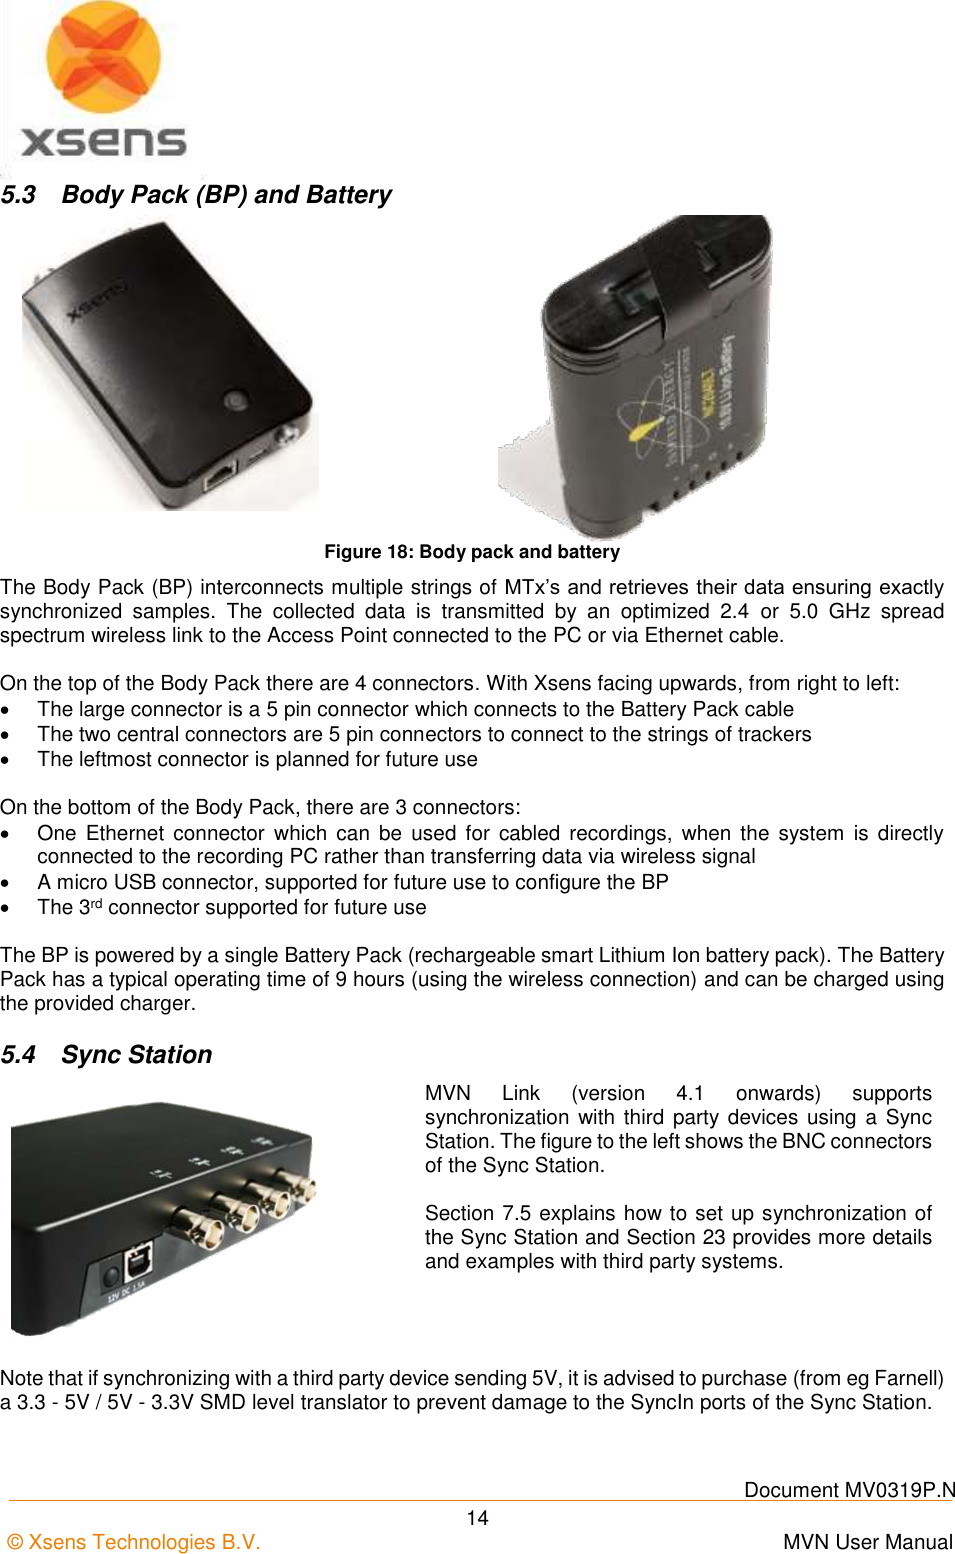    Document MV0319P.N © Xsens Technologies B.V.      MVN User Manual  14 5.3  Body Pack (BP) and Battery   Figure 18: Body pack and battery The Body Pack (BP) interconnects multiple strings of MTx’s and retrieves their data ensuring exactly synchronized  samples.  The  collected  data  is  transmitted  by  an  optimized  2.4  or  5.0  GHz  spread spectrum wireless link to the Access Point connected to the PC or via Ethernet cable.  On the top of the Body Pack there are 4 connectors. With Xsens facing upwards, from right to left:   The large connector is a 5 pin connector which connects to the Battery Pack cable   The two central connectors are 5 pin connectors to connect to the strings of trackers   The leftmost connector is planned for future use  On the bottom of the Body Pack, there are 3 connectors:   One  Ethernet connector  which  can  be  used  for  cabled  recordings,  when  the system  is  directly connected to the recording PC rather than transferring data via wireless signal   A micro USB connector, supported for future use to configure the BP   The 3rd connector supported for future use  The BP is powered by a single Battery Pack (rechargeable smart Lithium Ion battery pack). The Battery Pack has a typical operating time of 9 hours (using the wireless connection) and can be charged using the provided charger. 5.4  Sync Station  MVN  Link  (version  4.1  onwards)  supports synchronization  with third party devices  using  a Sync Station. The figure to the left shows the BNC connectors of the Sync Station.  Section 7.5 explains how to set up synchronization of the Sync Station and Section 23 provides more details and examples with third party systems.  Note that if synchronizing with a third party device sending 5V, it is advised to purchase (from eg Farnell) a 3.3 - 5V / 5V - 3.3V SMD level translator to prevent damage to the SyncIn ports of the Sync Station. 